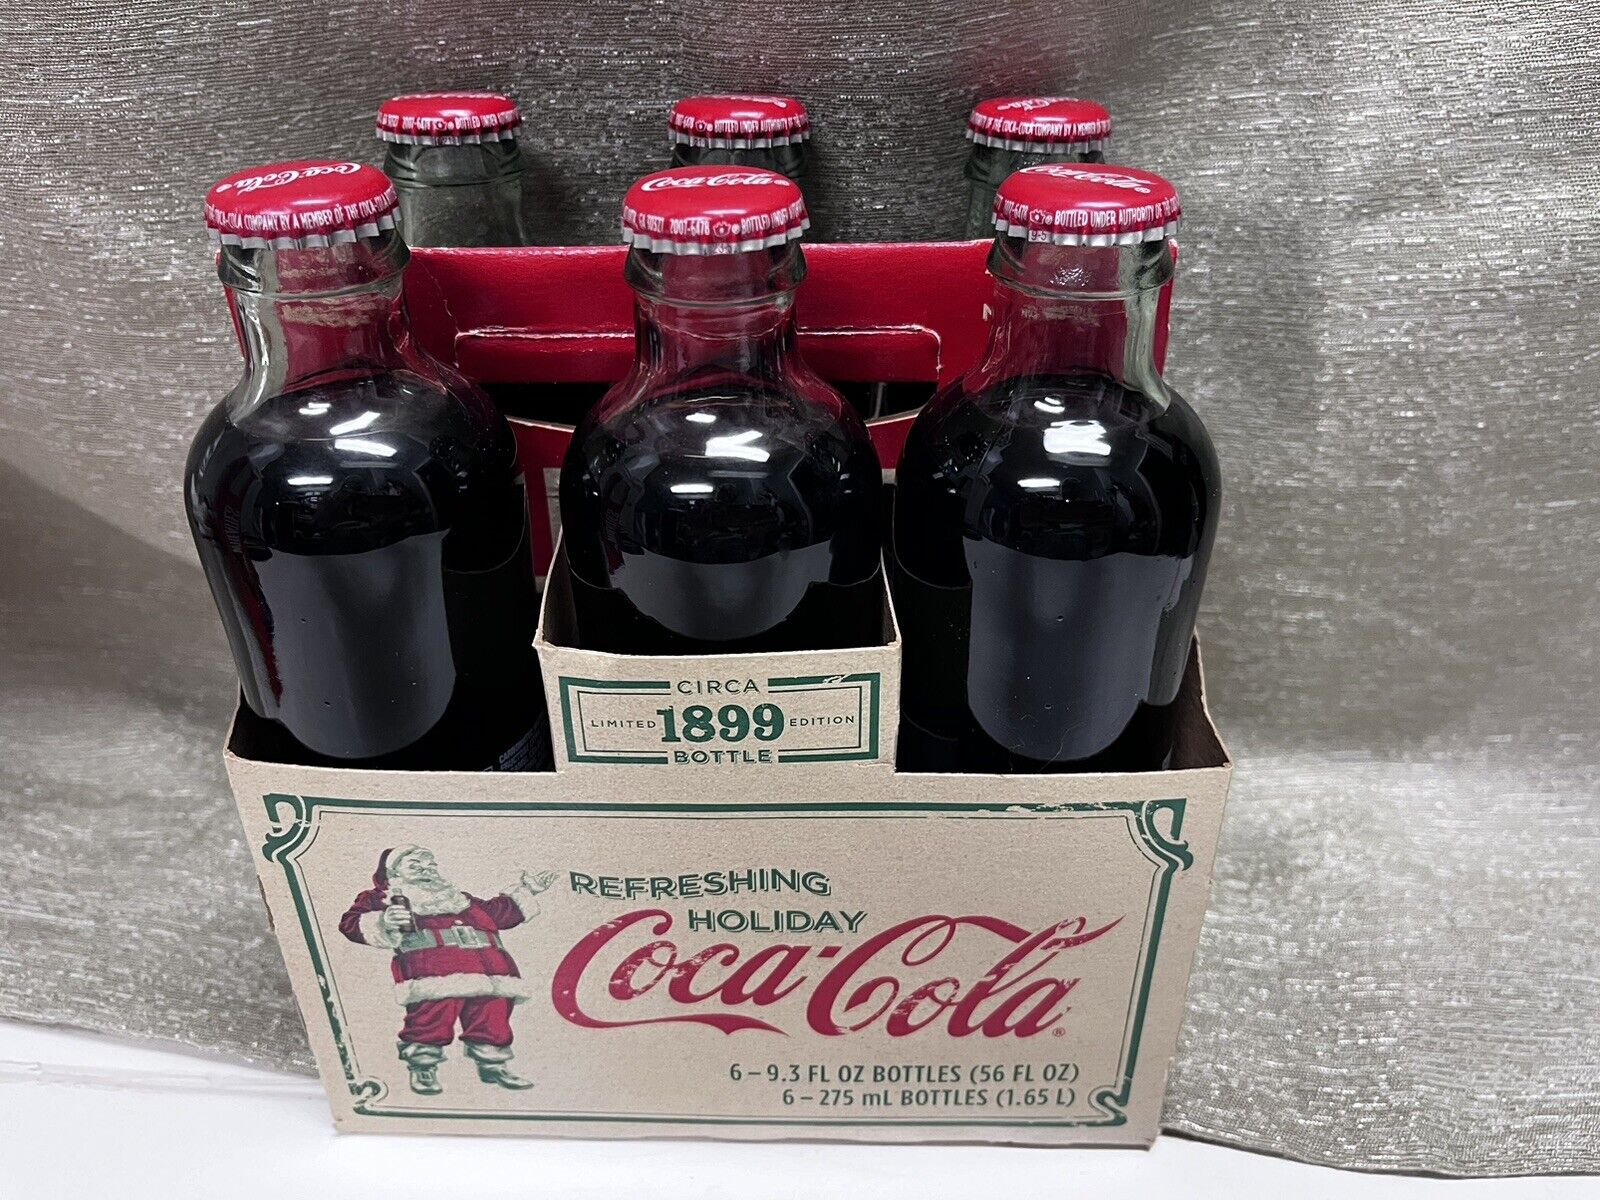 Circa Limited 1899 Edition Coca-Cola  Bottles 6 pack 9.3 fl oz  New unopened